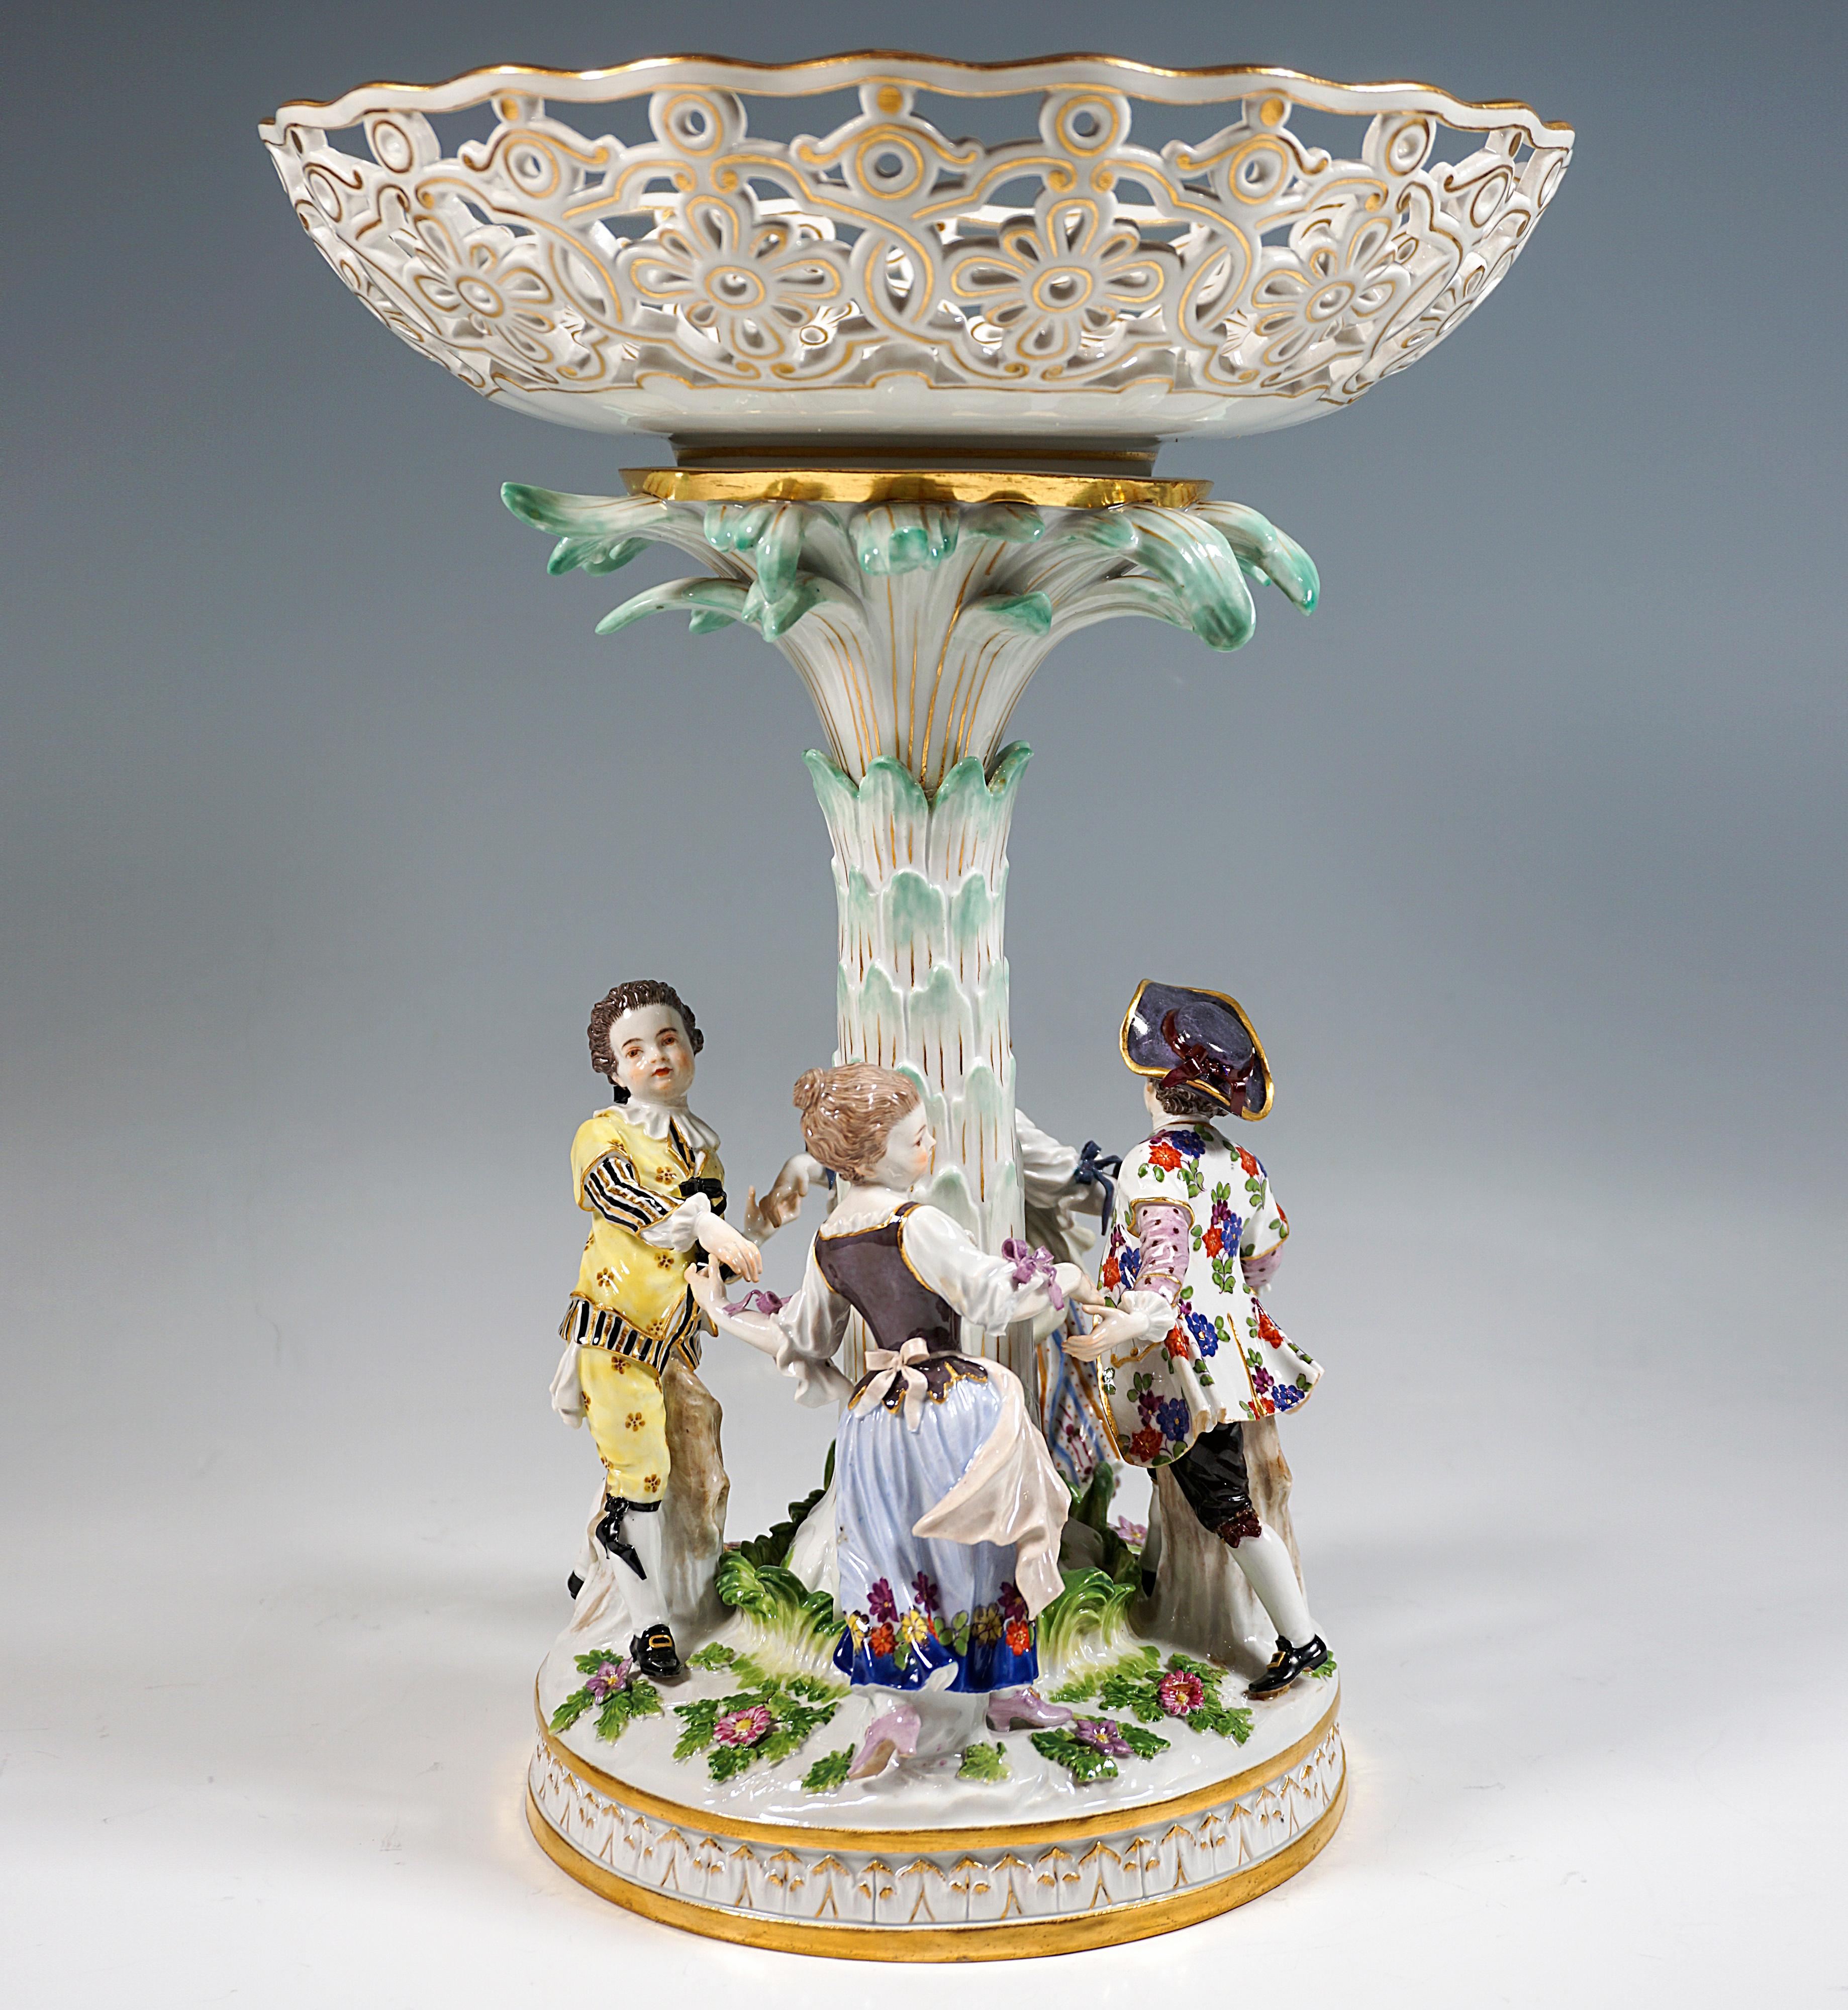 Four gardener children, two girls and two boys, dancing hand in hand in a circle around a palm-like plant, on the crown of which rests a breakthrough bowl, the figures are wearing elaborate rococo rural style clothing, which is equipped with the